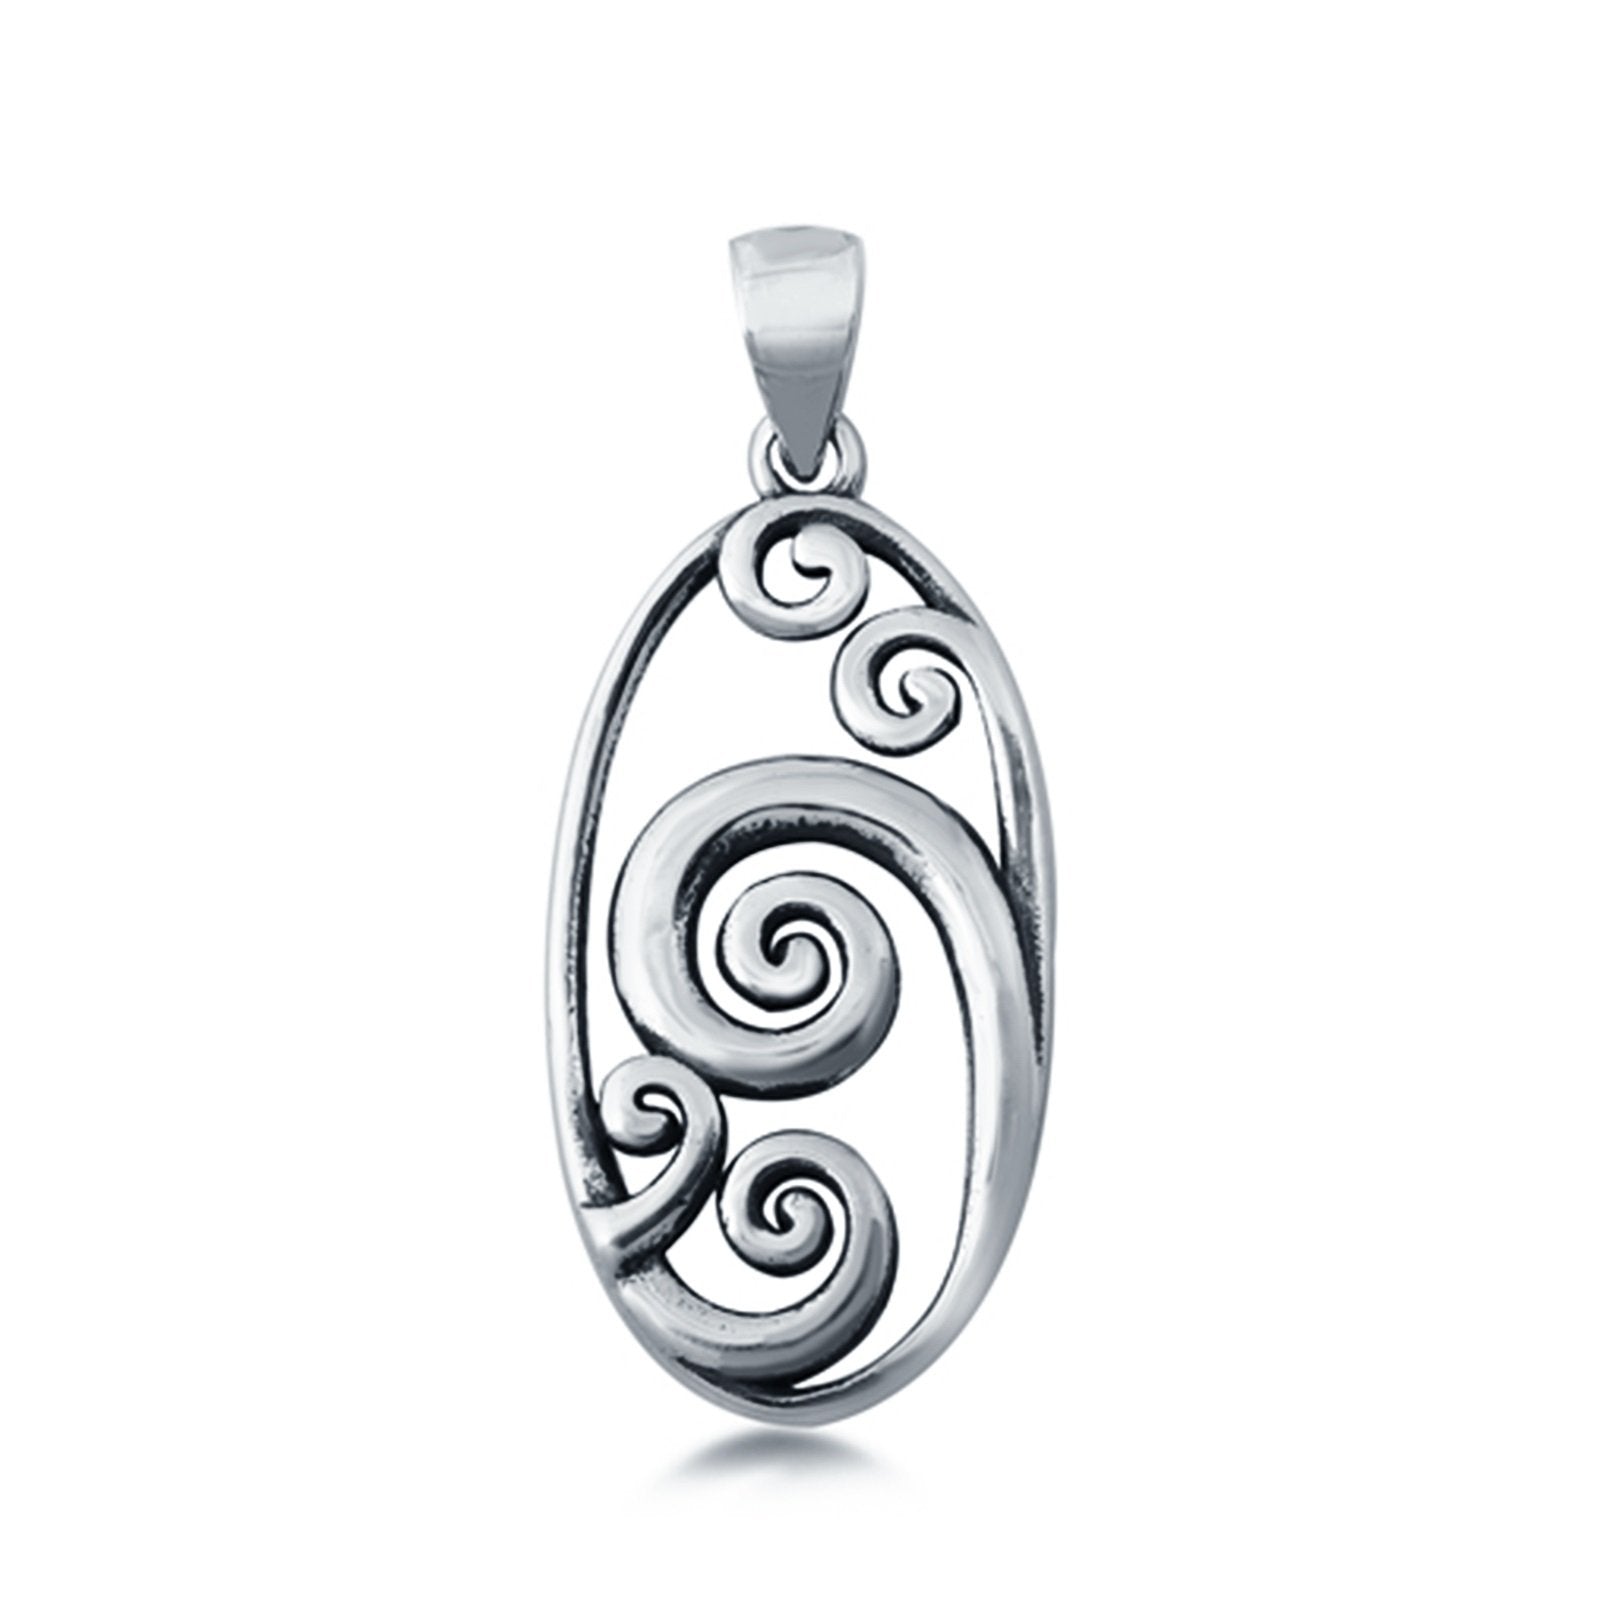 Silver Waves Pendant Charm 925 Sterling Silver Fashion Jewelry (23mm)